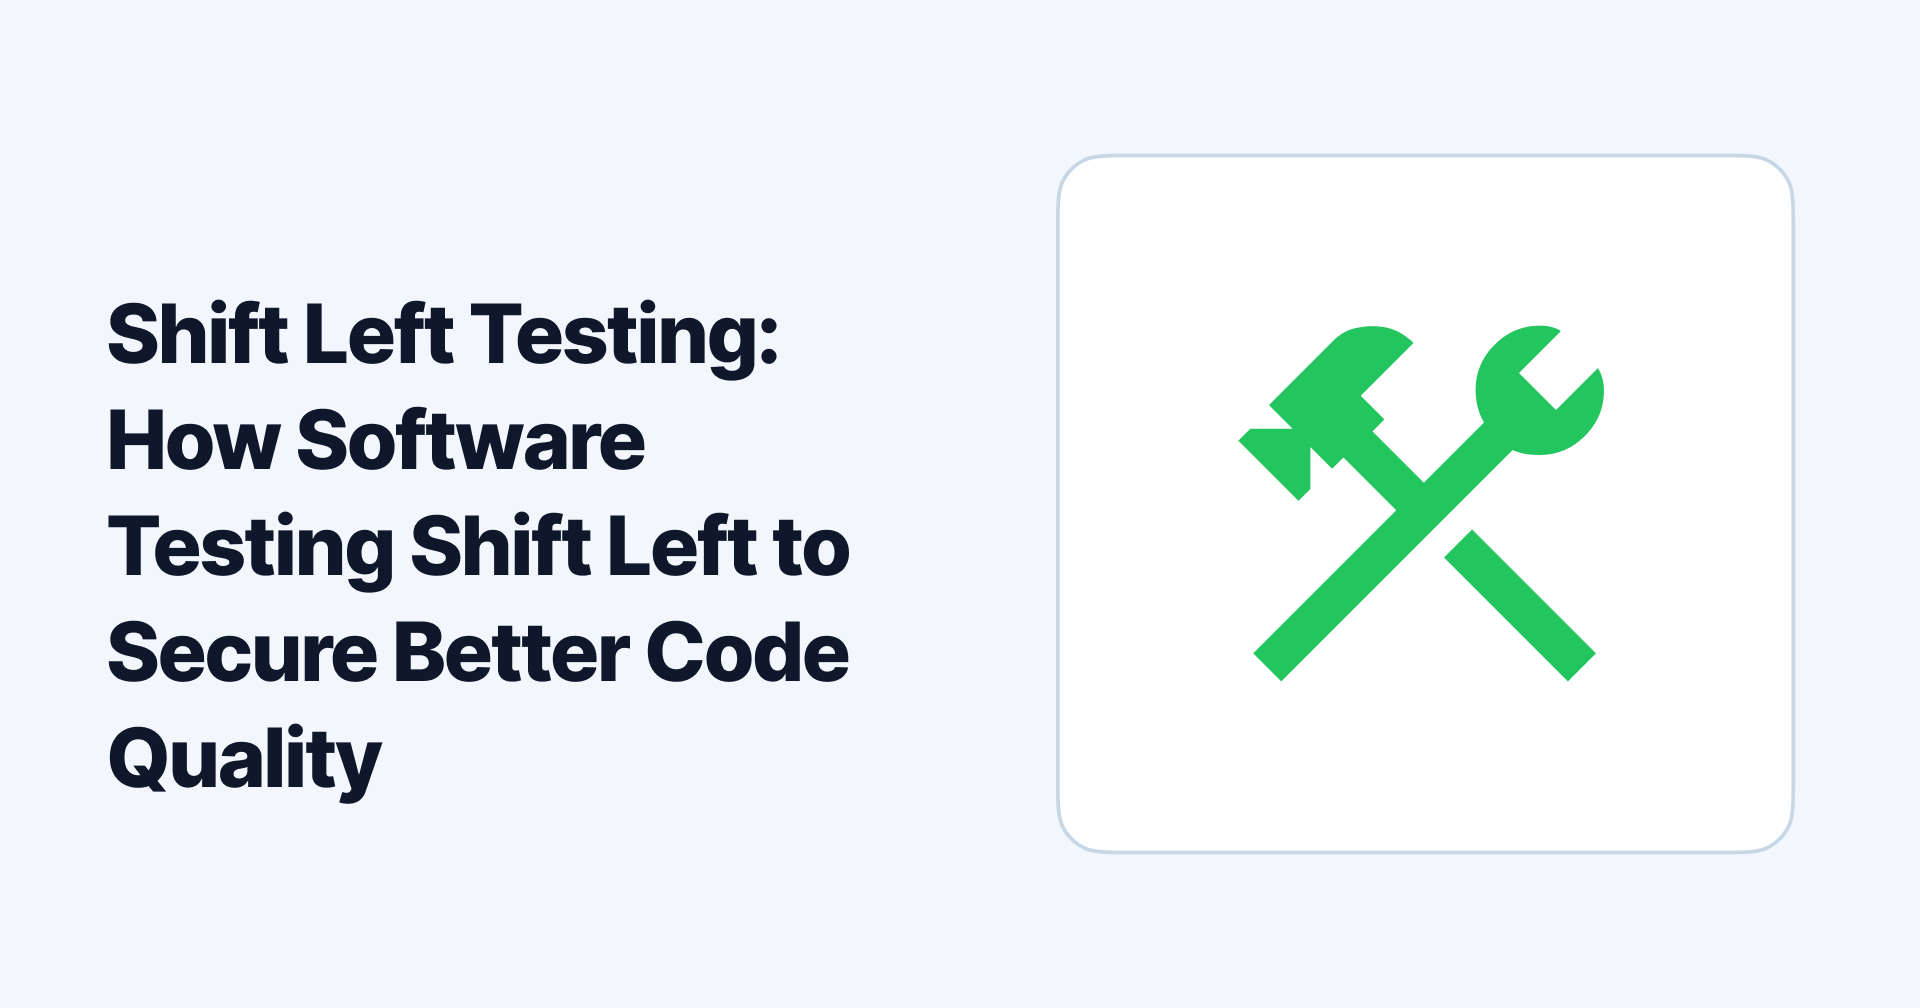 Shift Left Testing: How Software Testing Shift Left to Secure Better Code Quality